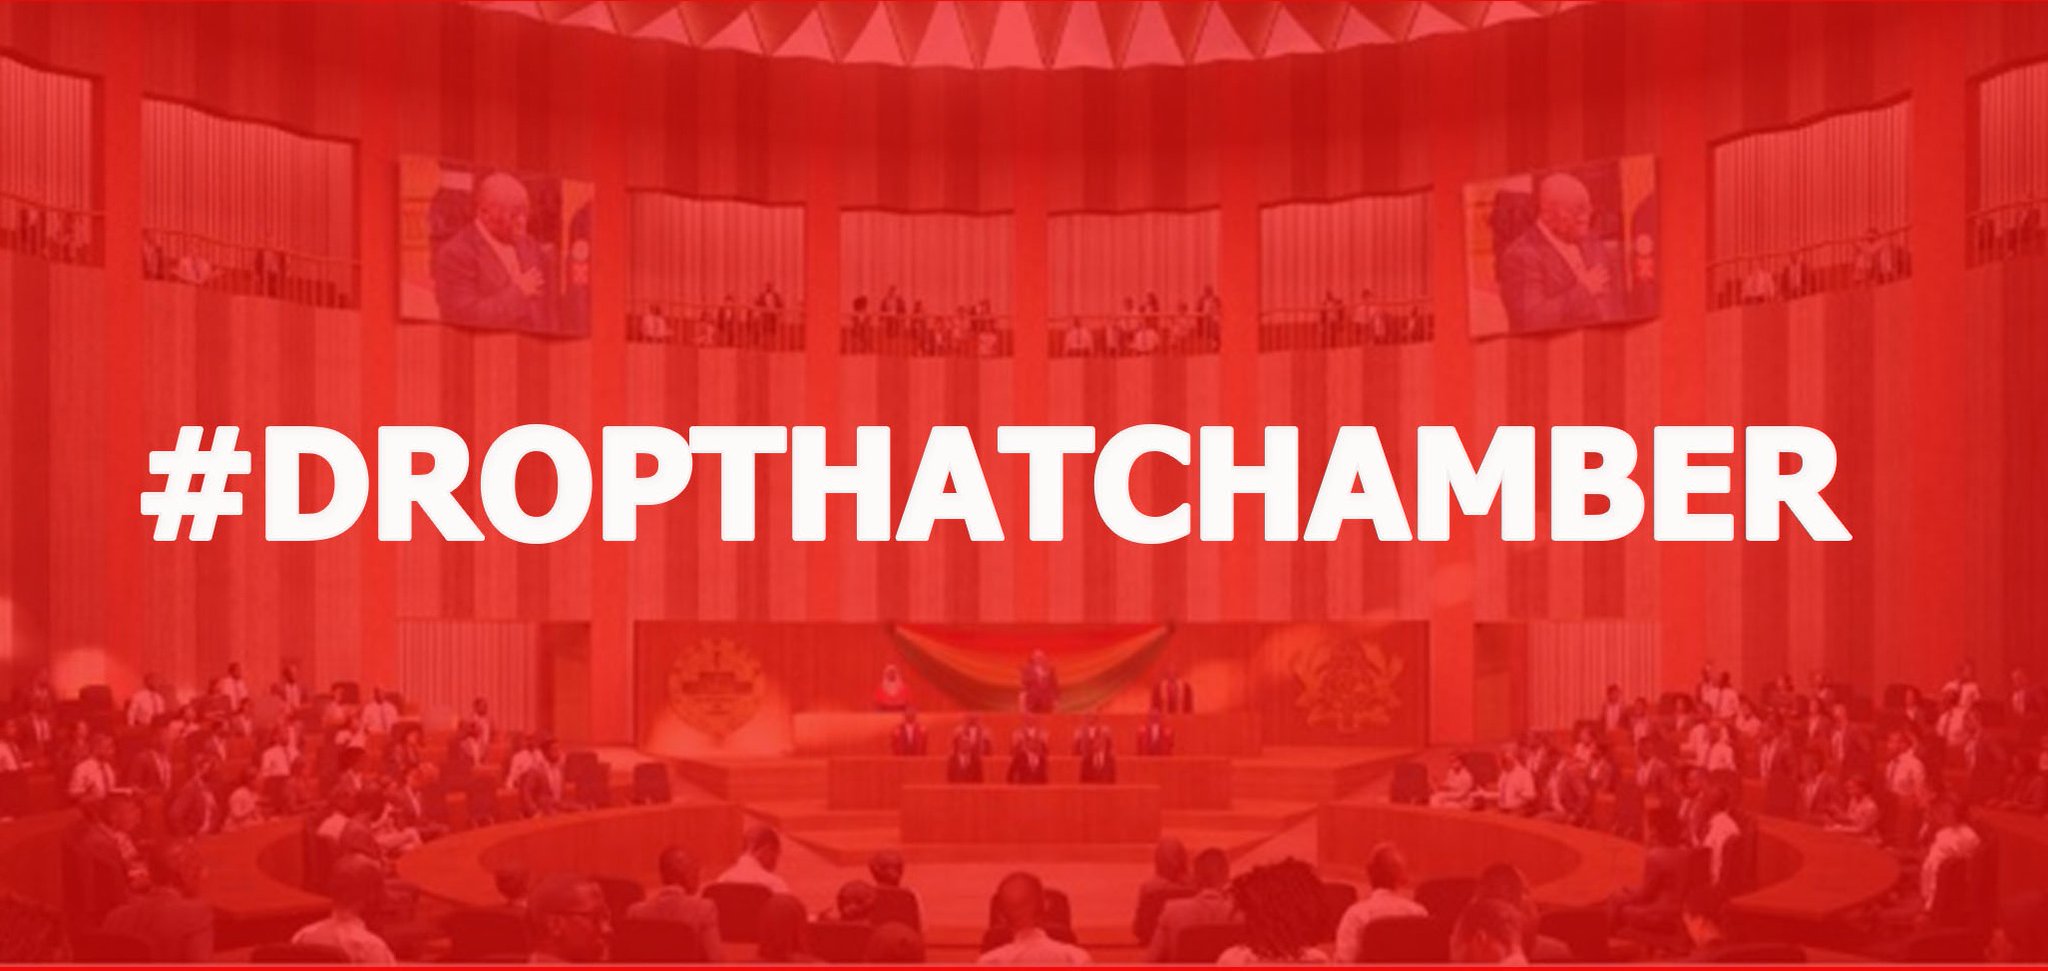 #Dropthatchamber: The day Ghanaian youth spoke truth to power